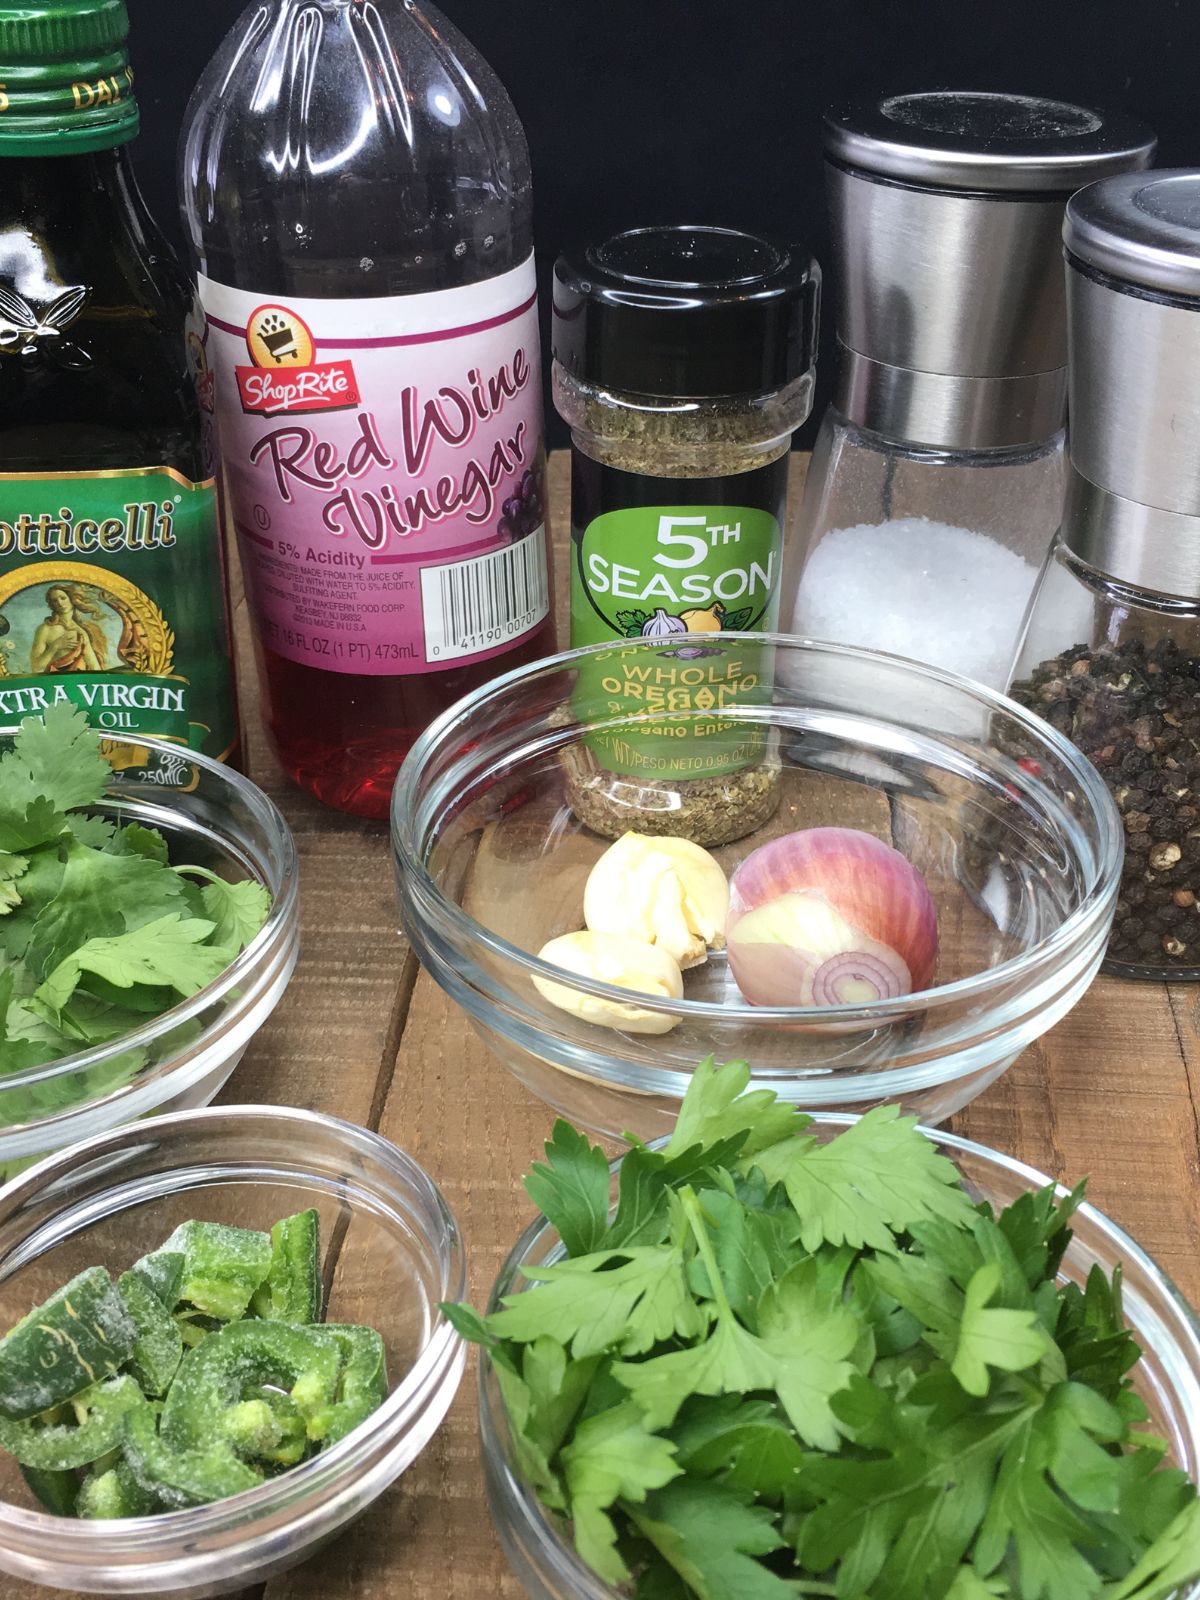 Ingredients for Chimichurri sauce.